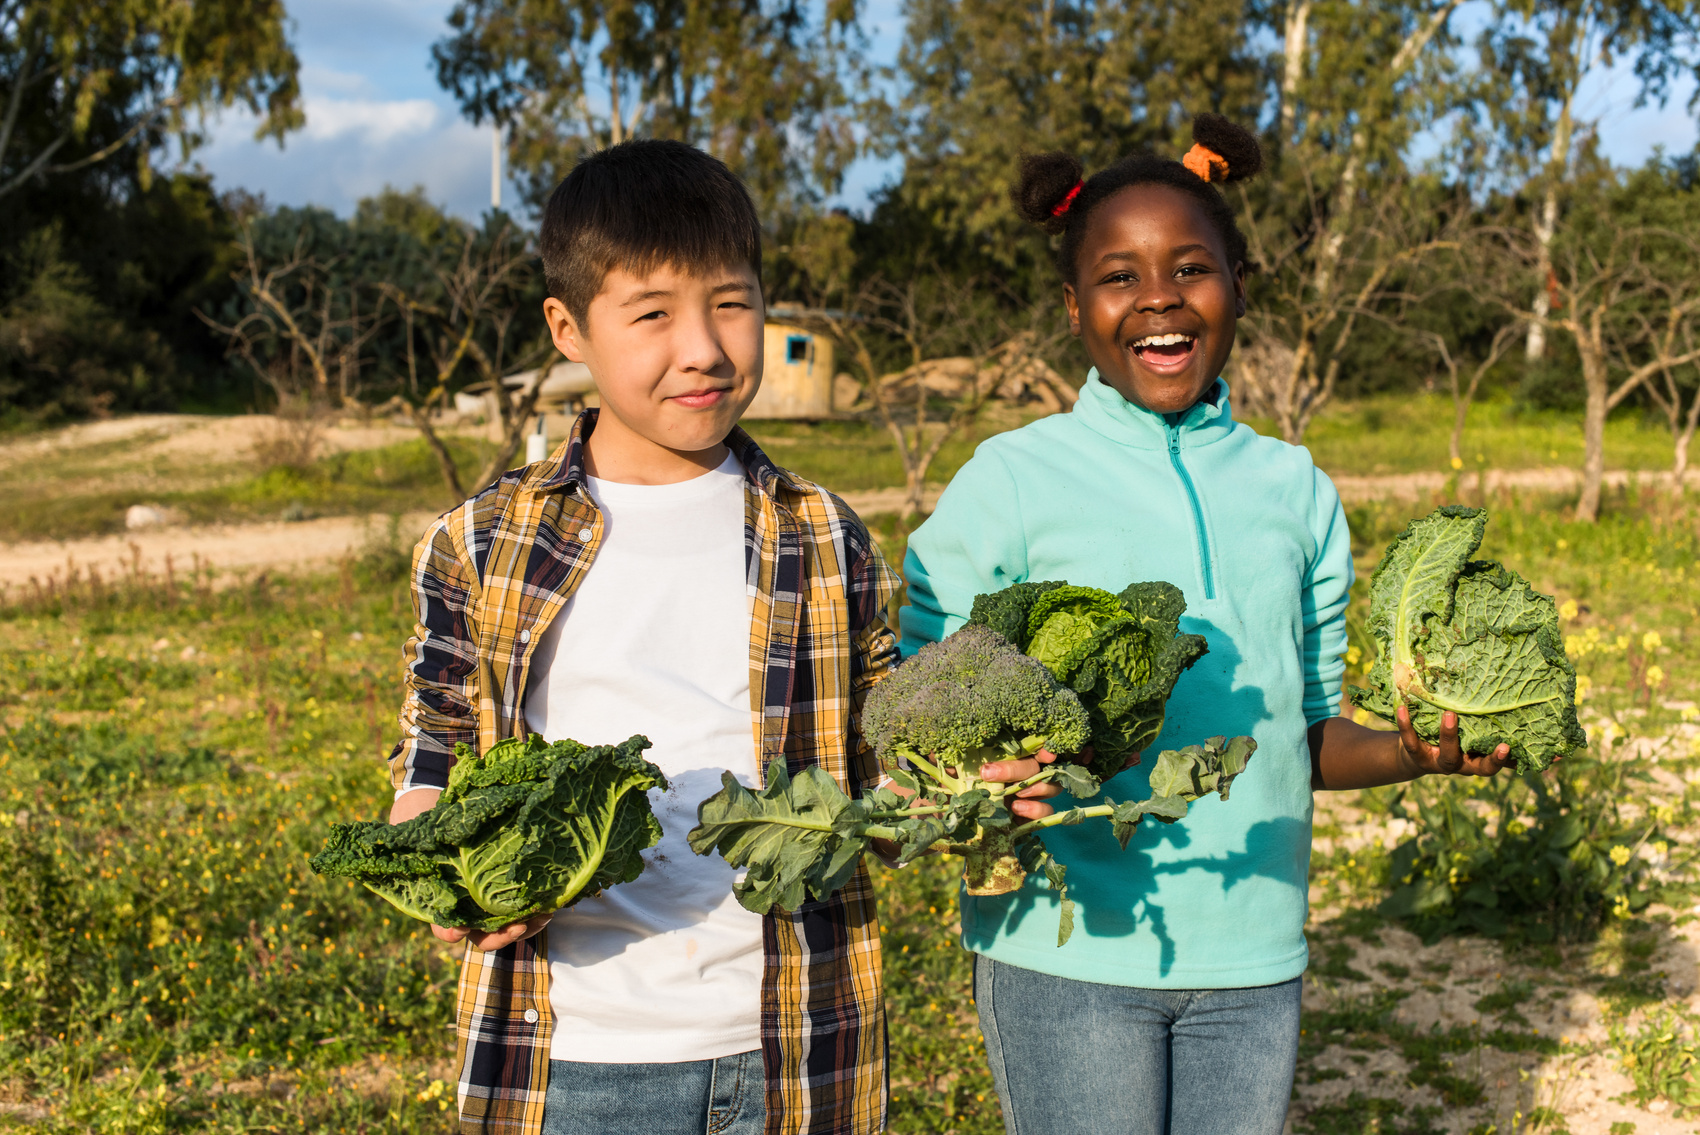 Two Diverse Children Happily Carrying Vegetables in Garden